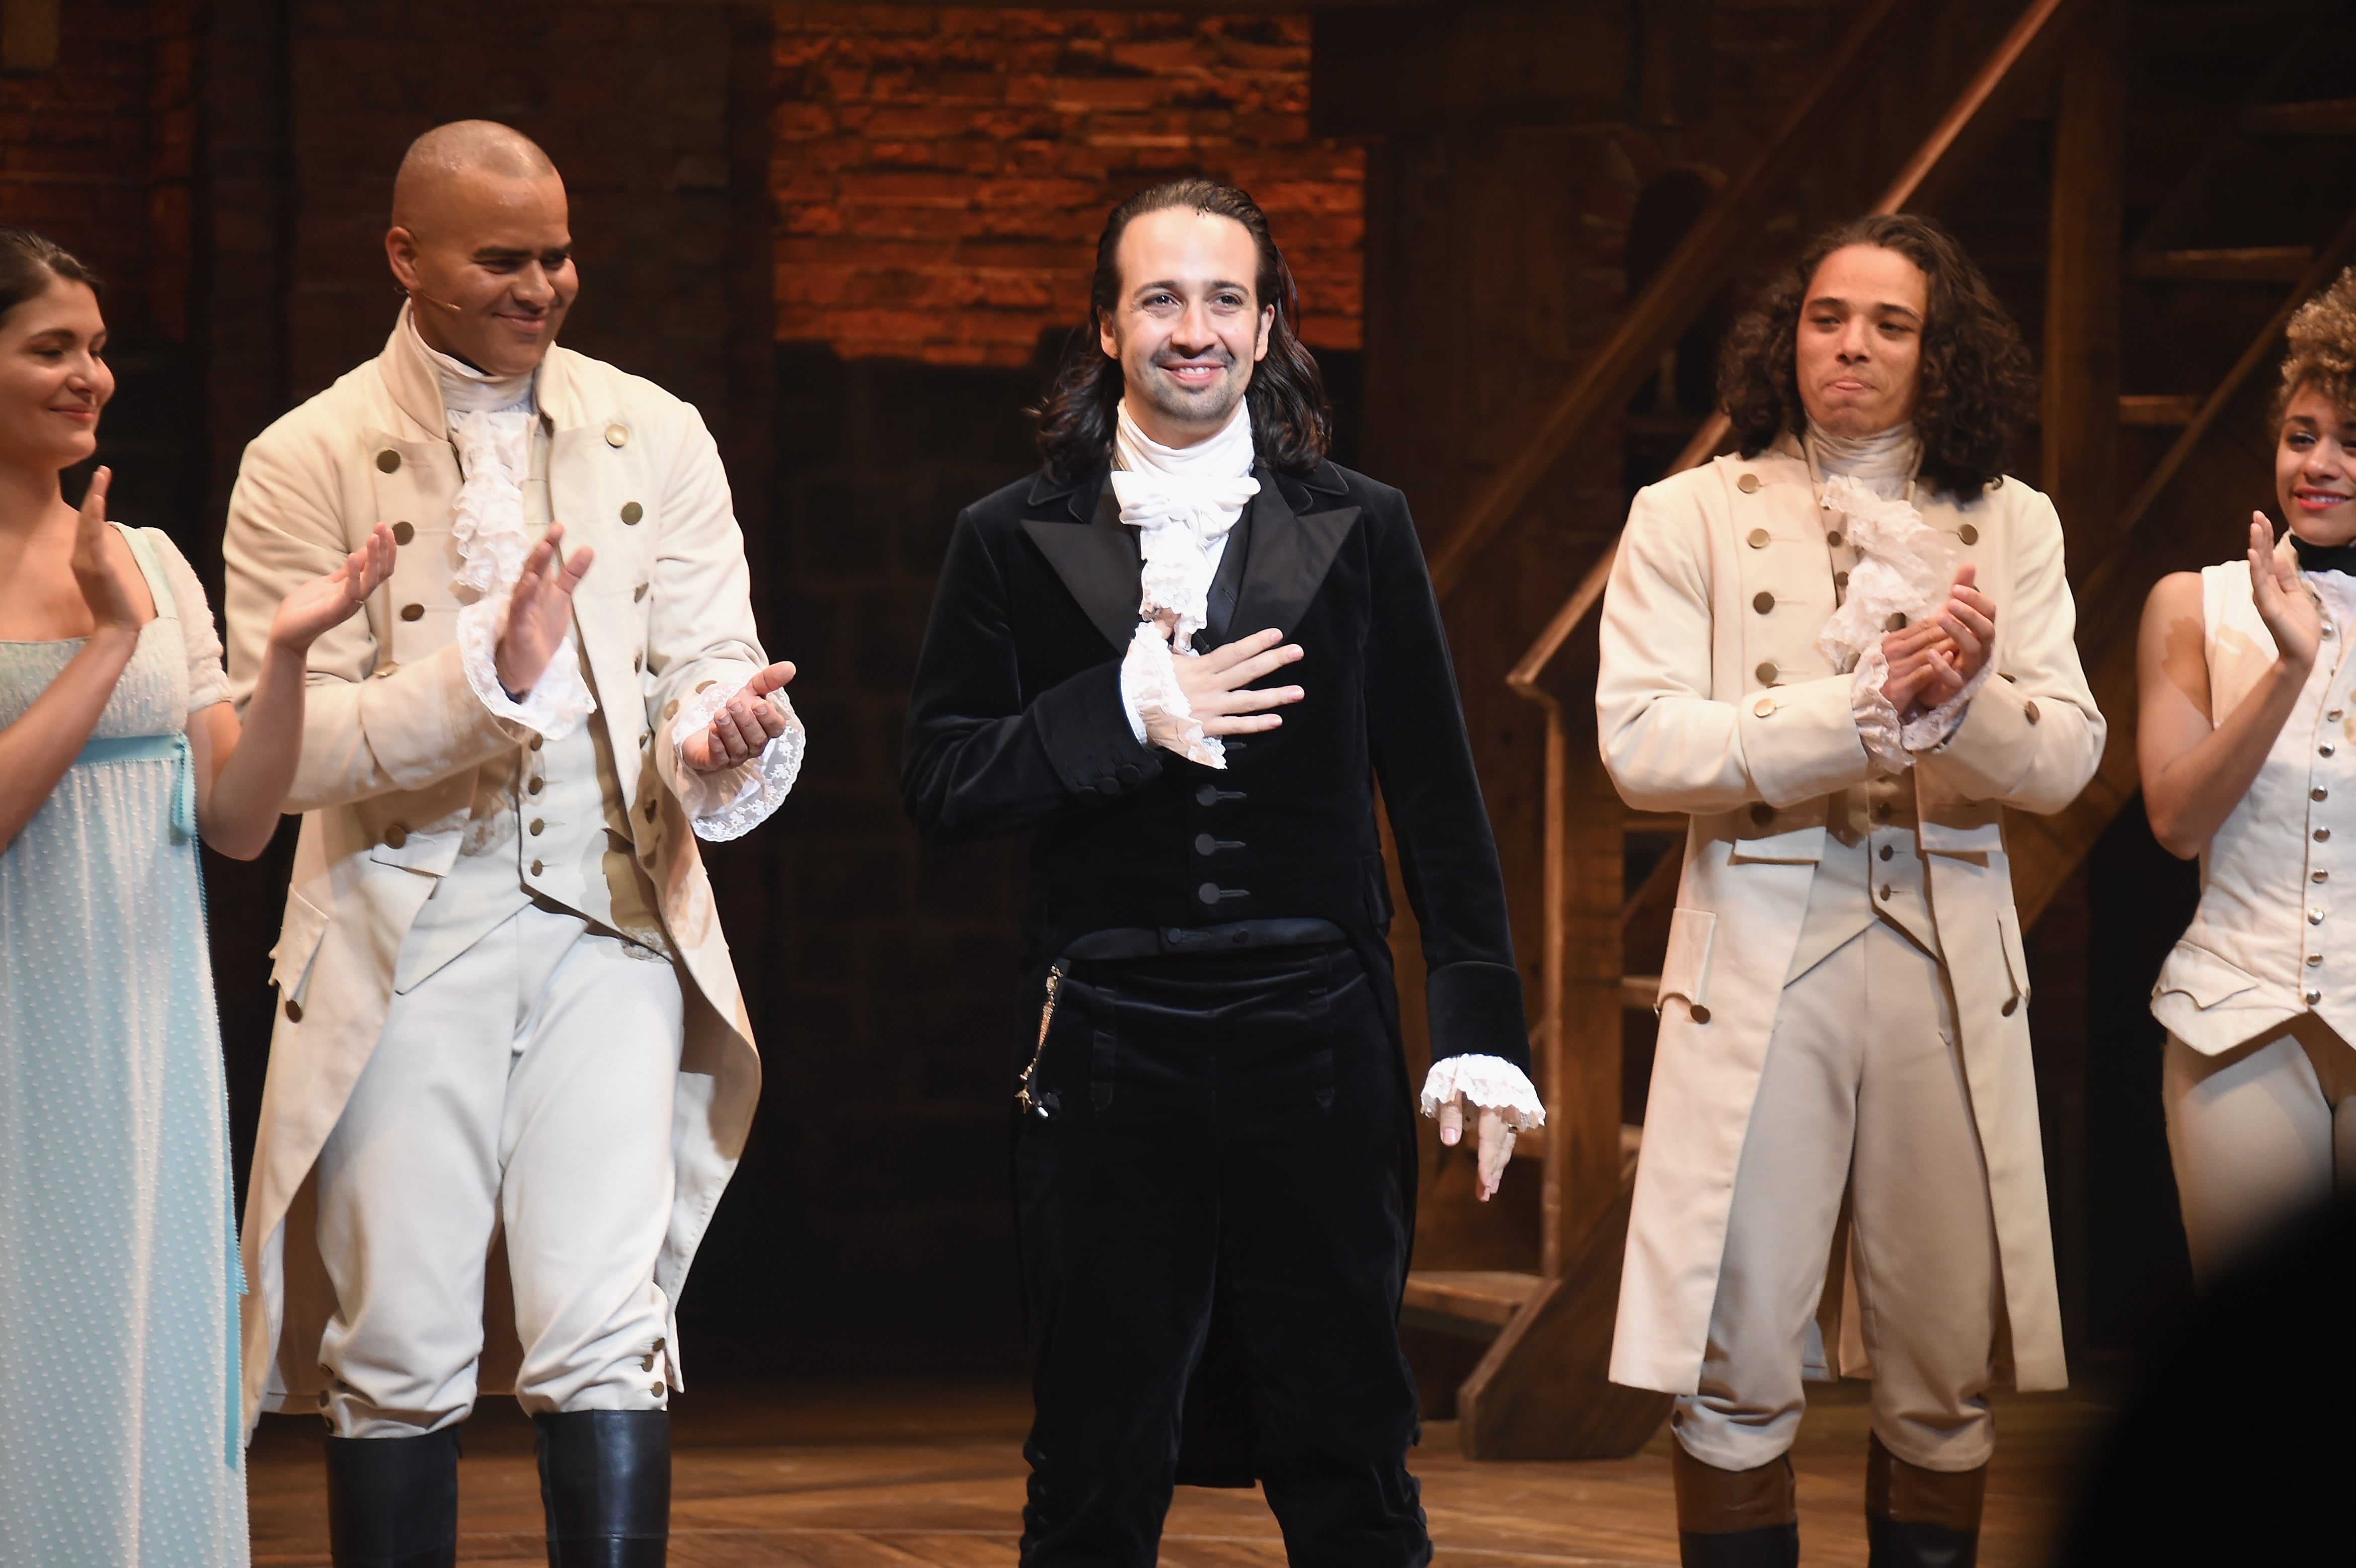 It's official: The smash hit musical Hamilton is coming back to Australia